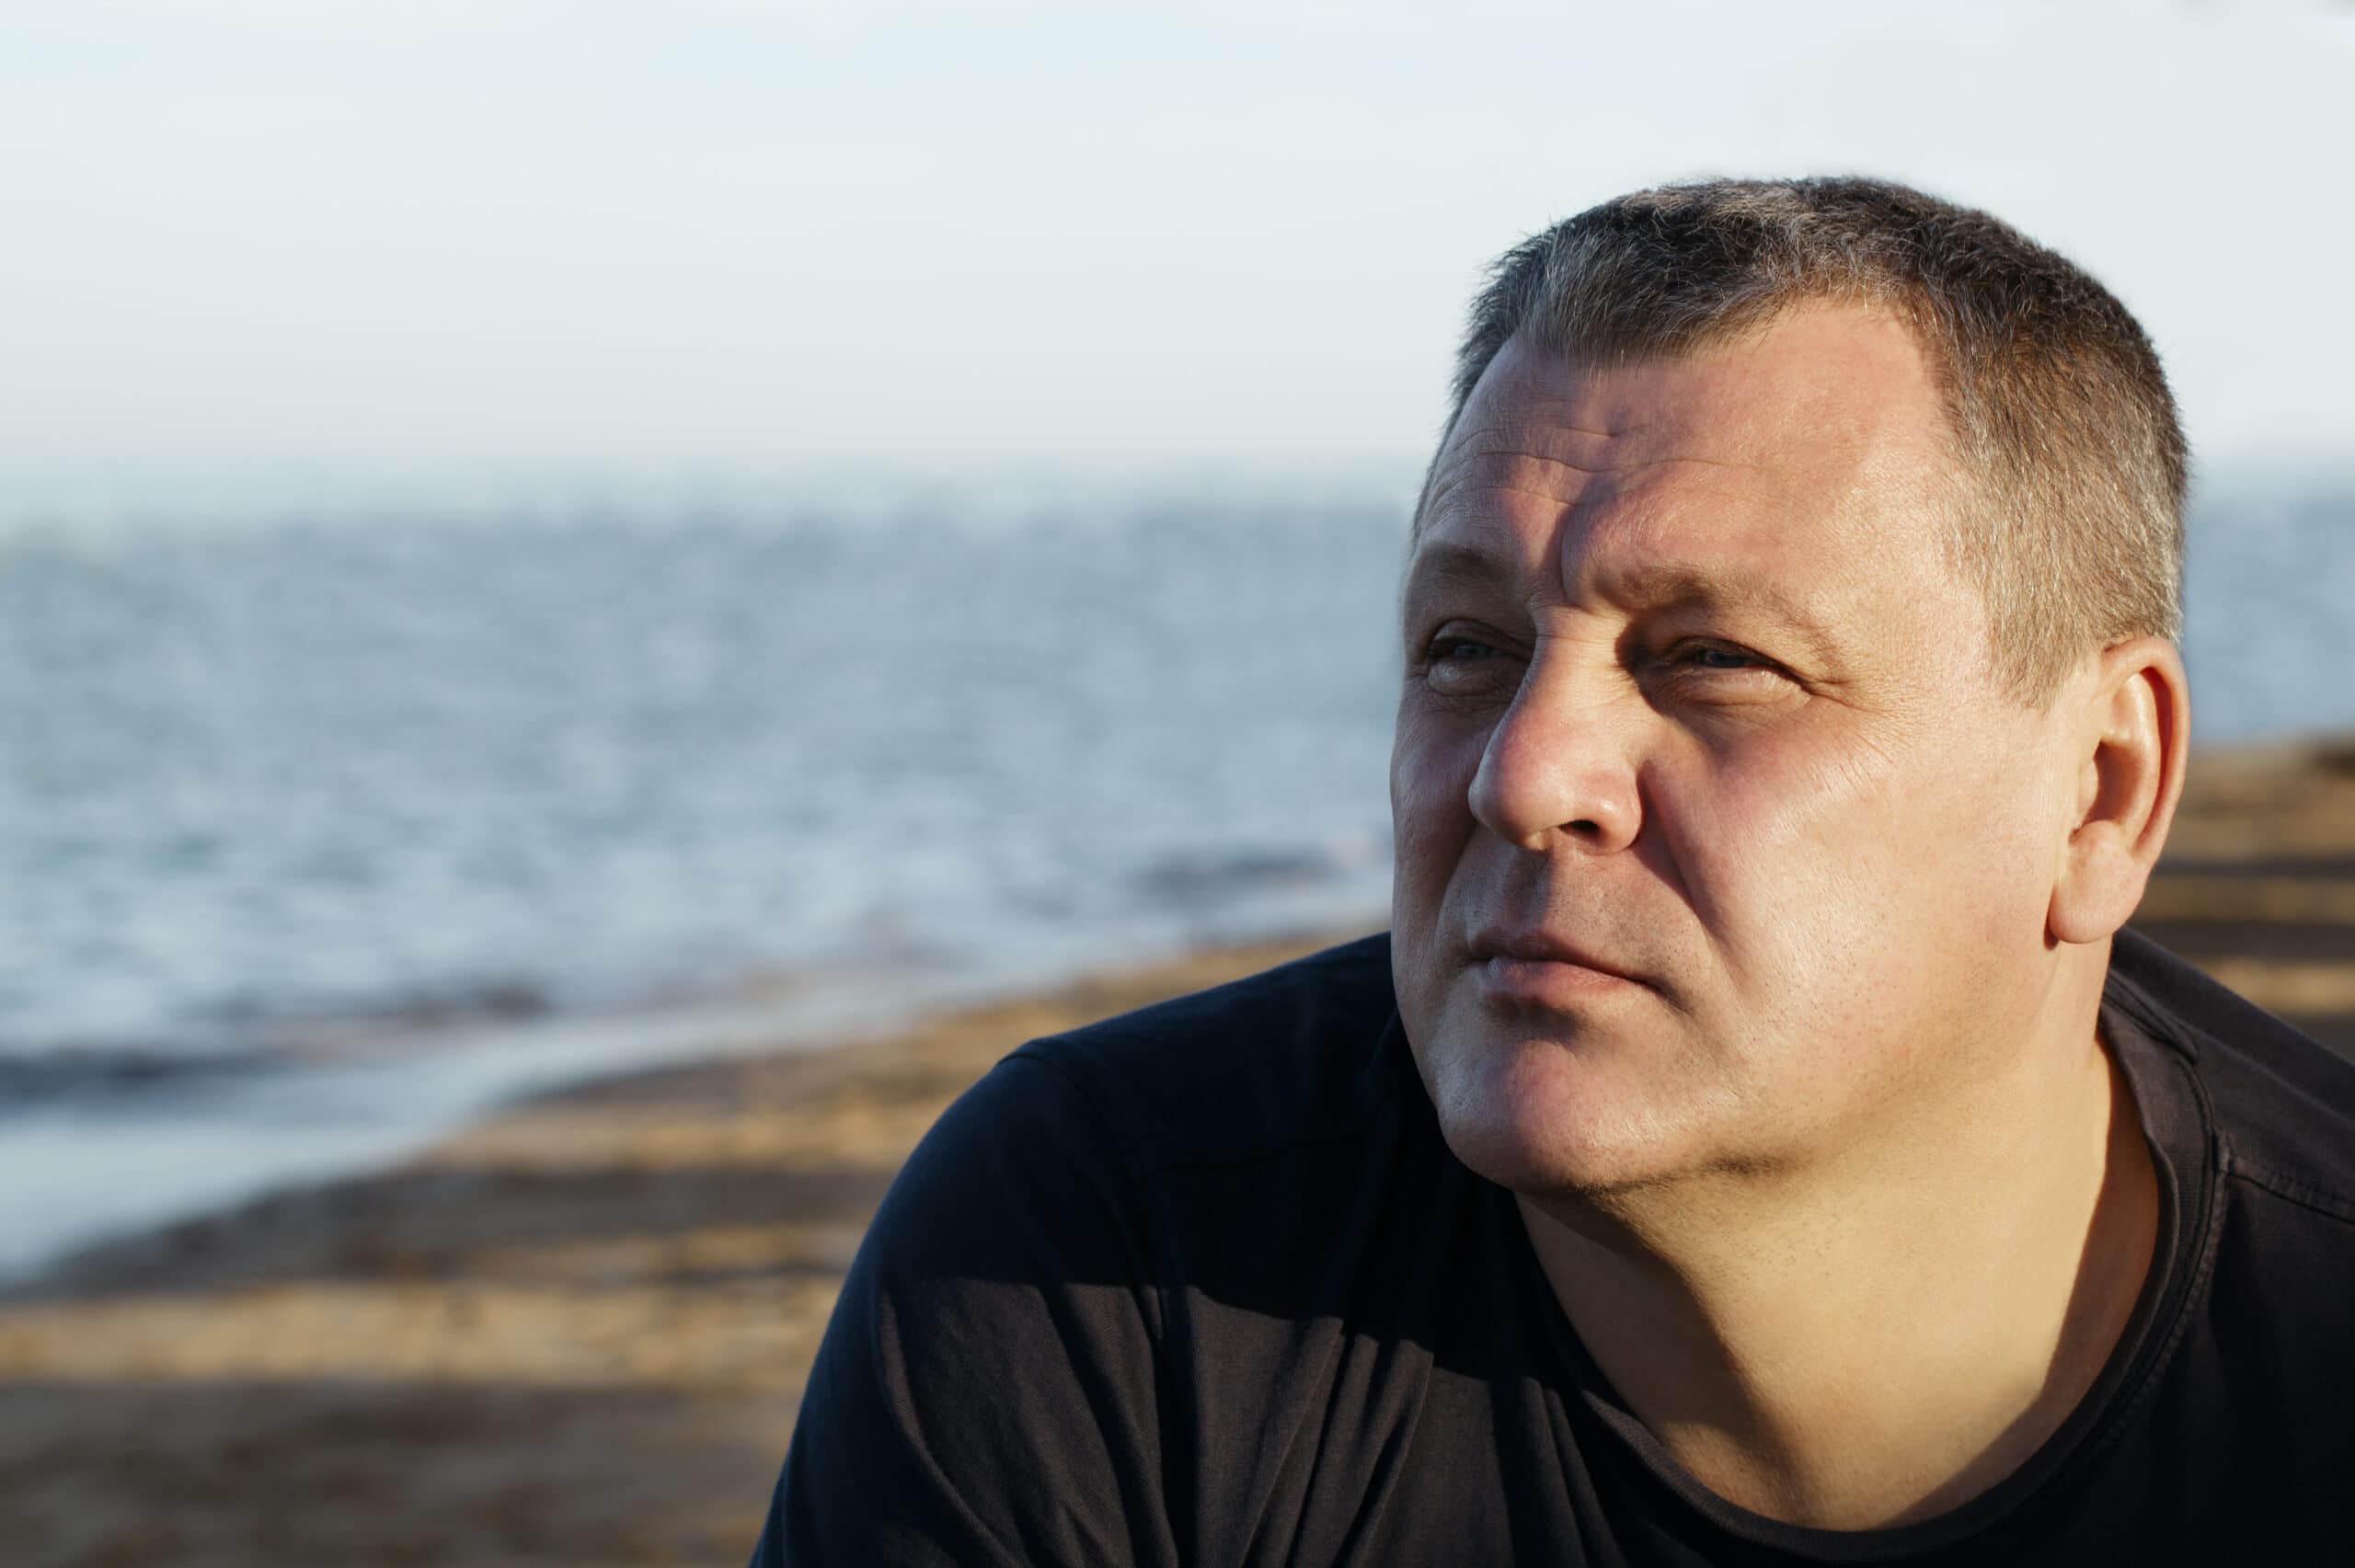 Portrait of a middle-aged man looking away from the camera on a beach.